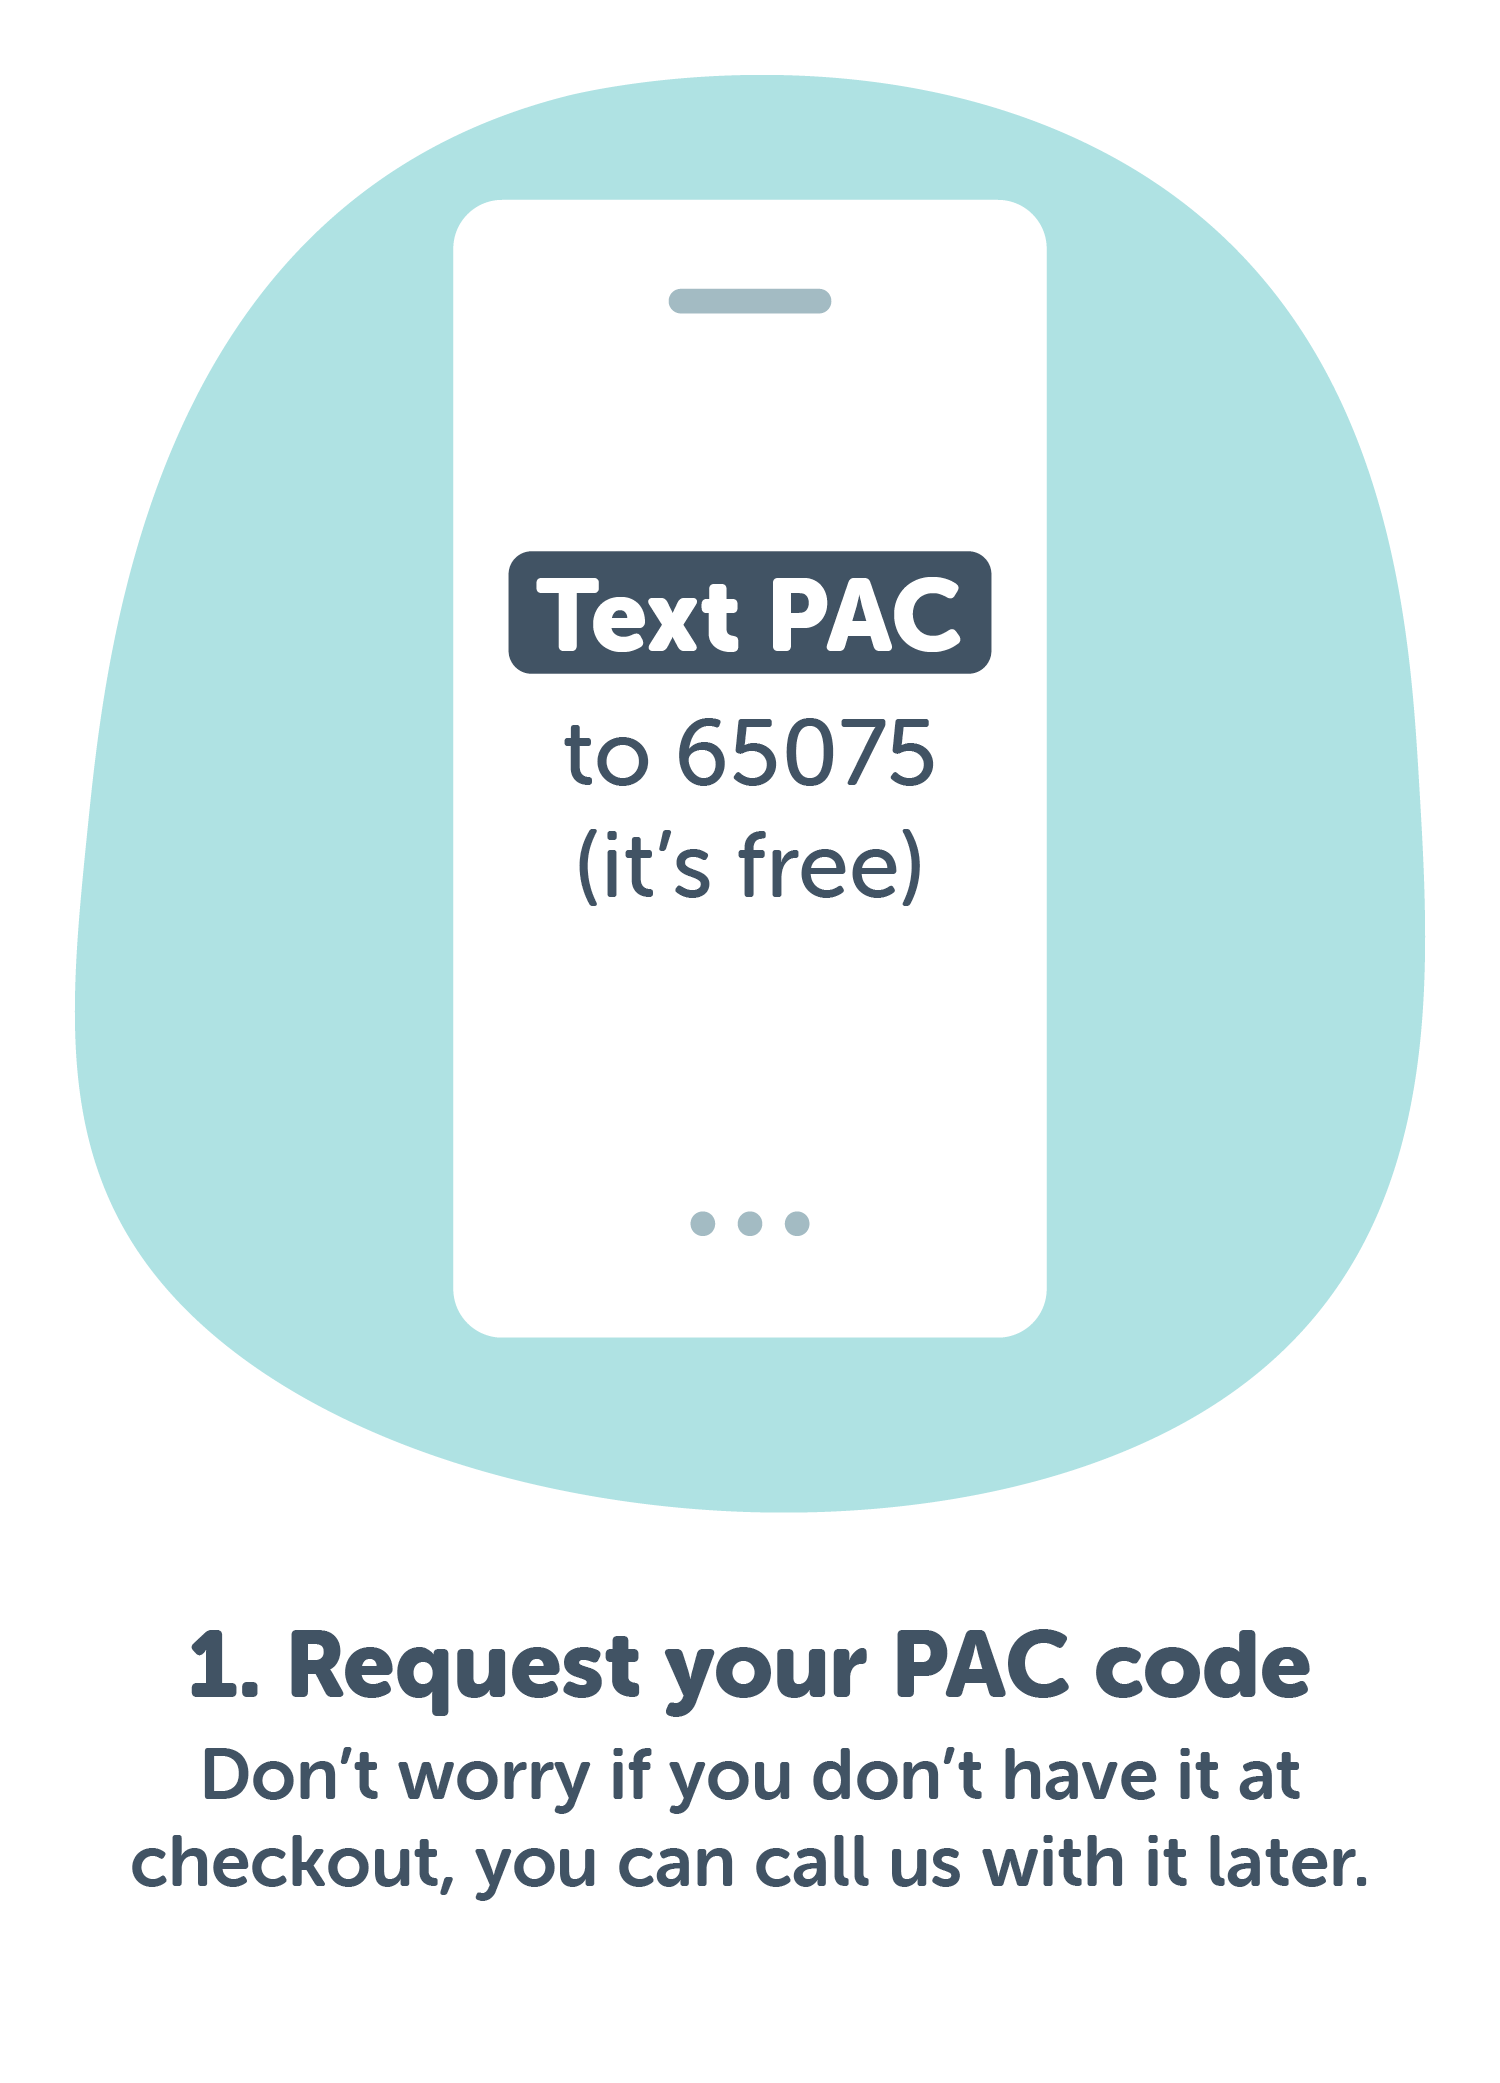 Request your PAC code